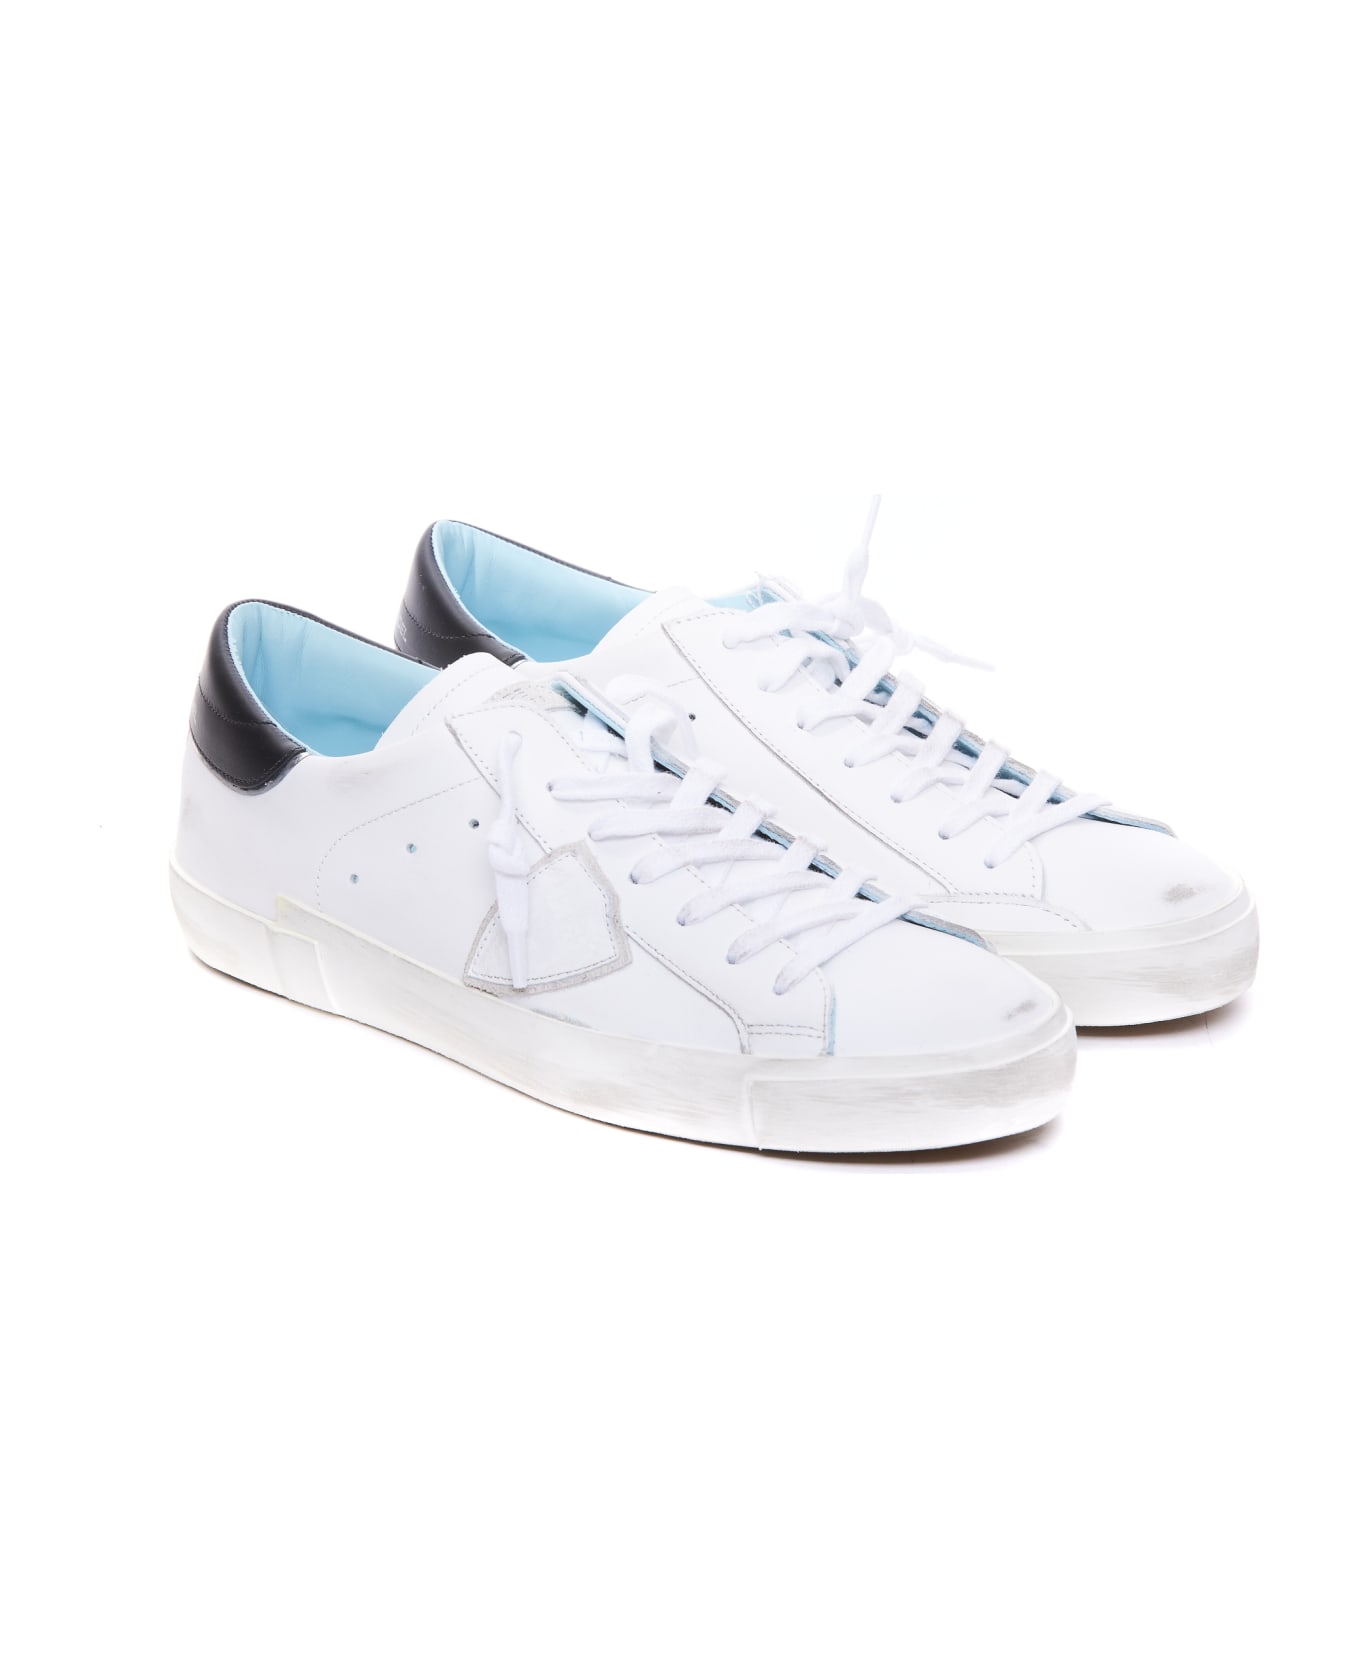 Philippe Model Prsx Low Sneakers - White スニーカー